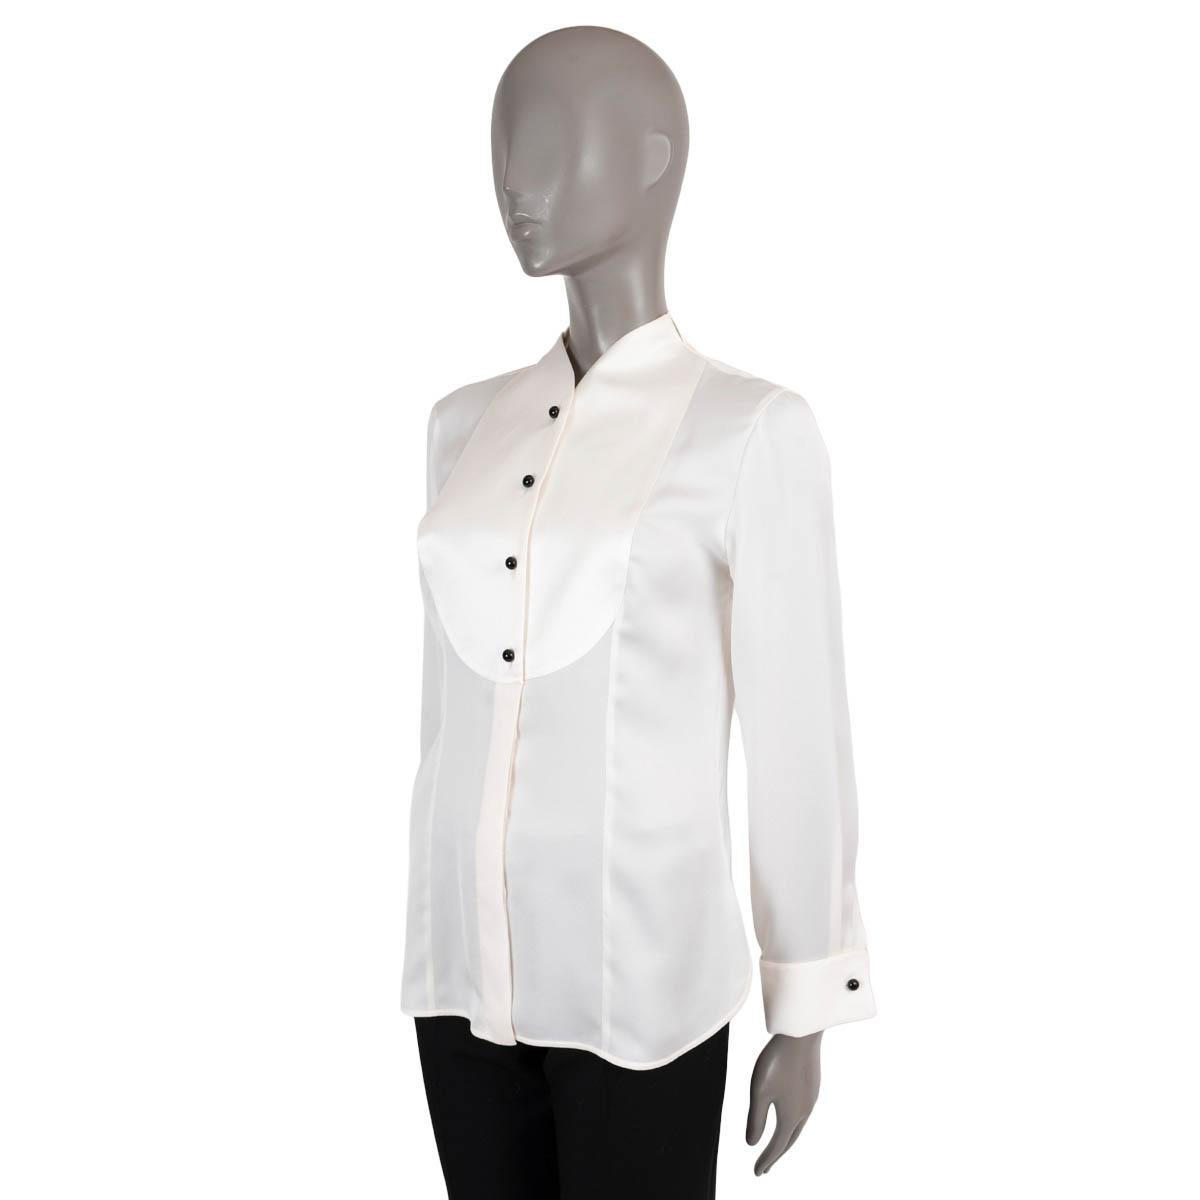 100% authentic Giorgio Armani tuxedo shirt in cream crepe silk (100%). Features V-neck with split mock collar and satin bib and cuffs. Closes with contrast black buttons on the front. Has been worn and is in excellent condition.

2018